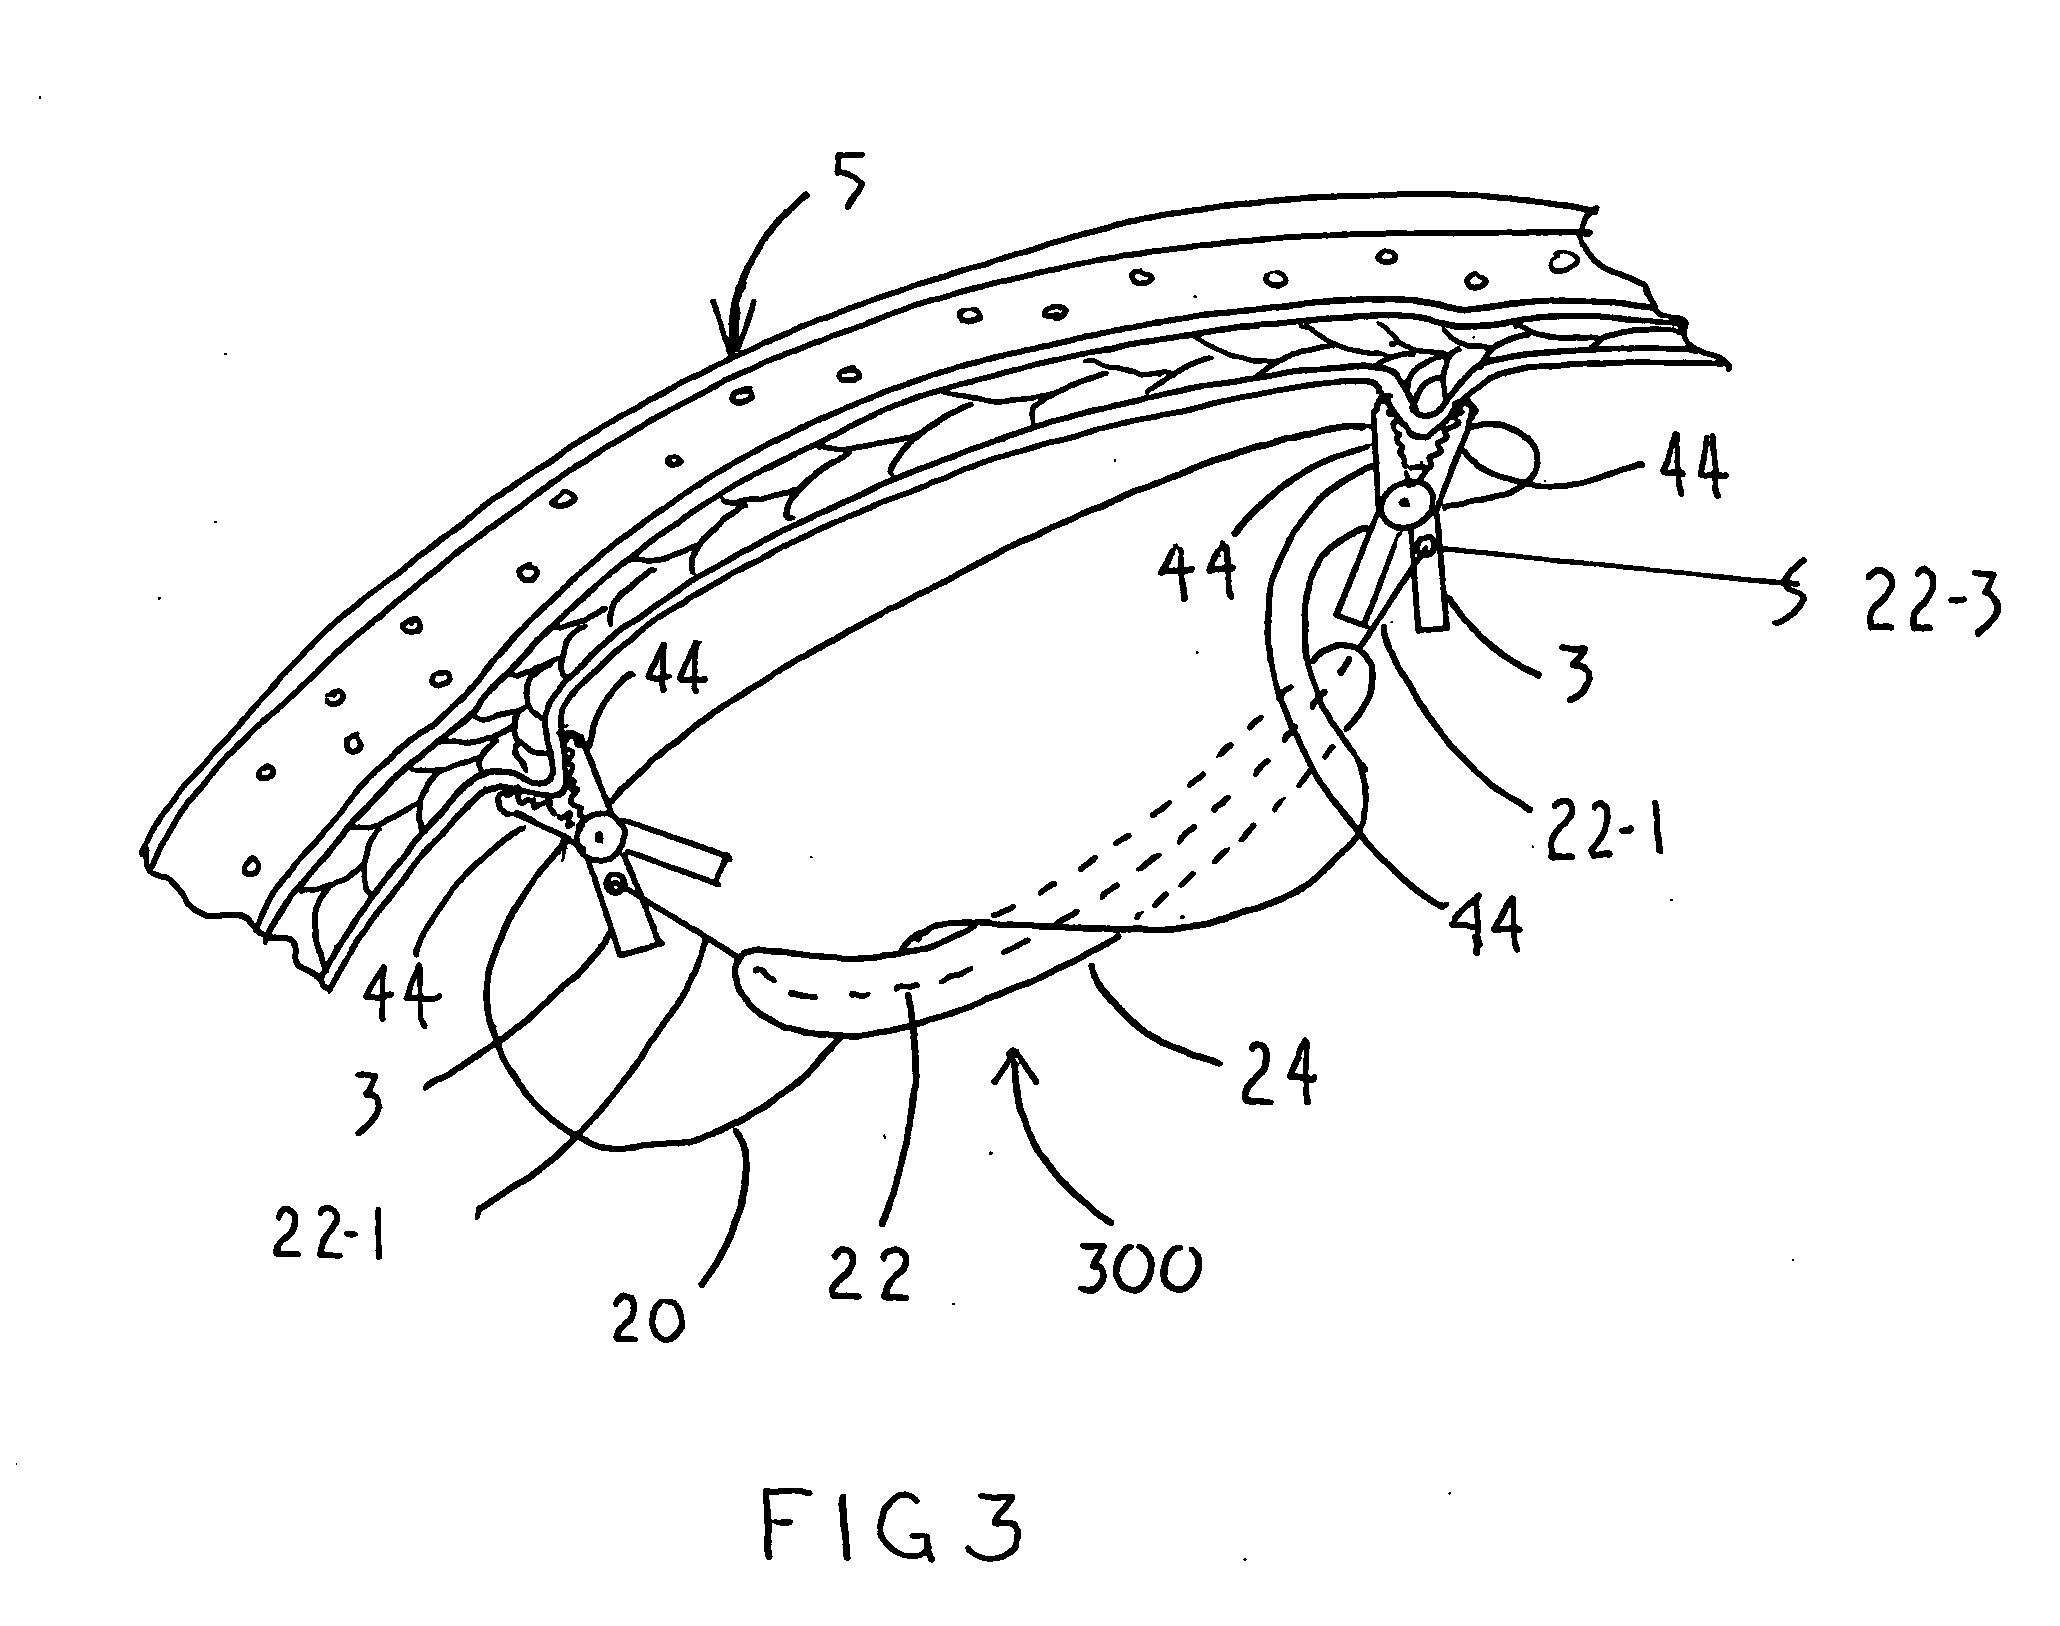 Linear tension internal organ supports and method for using the same